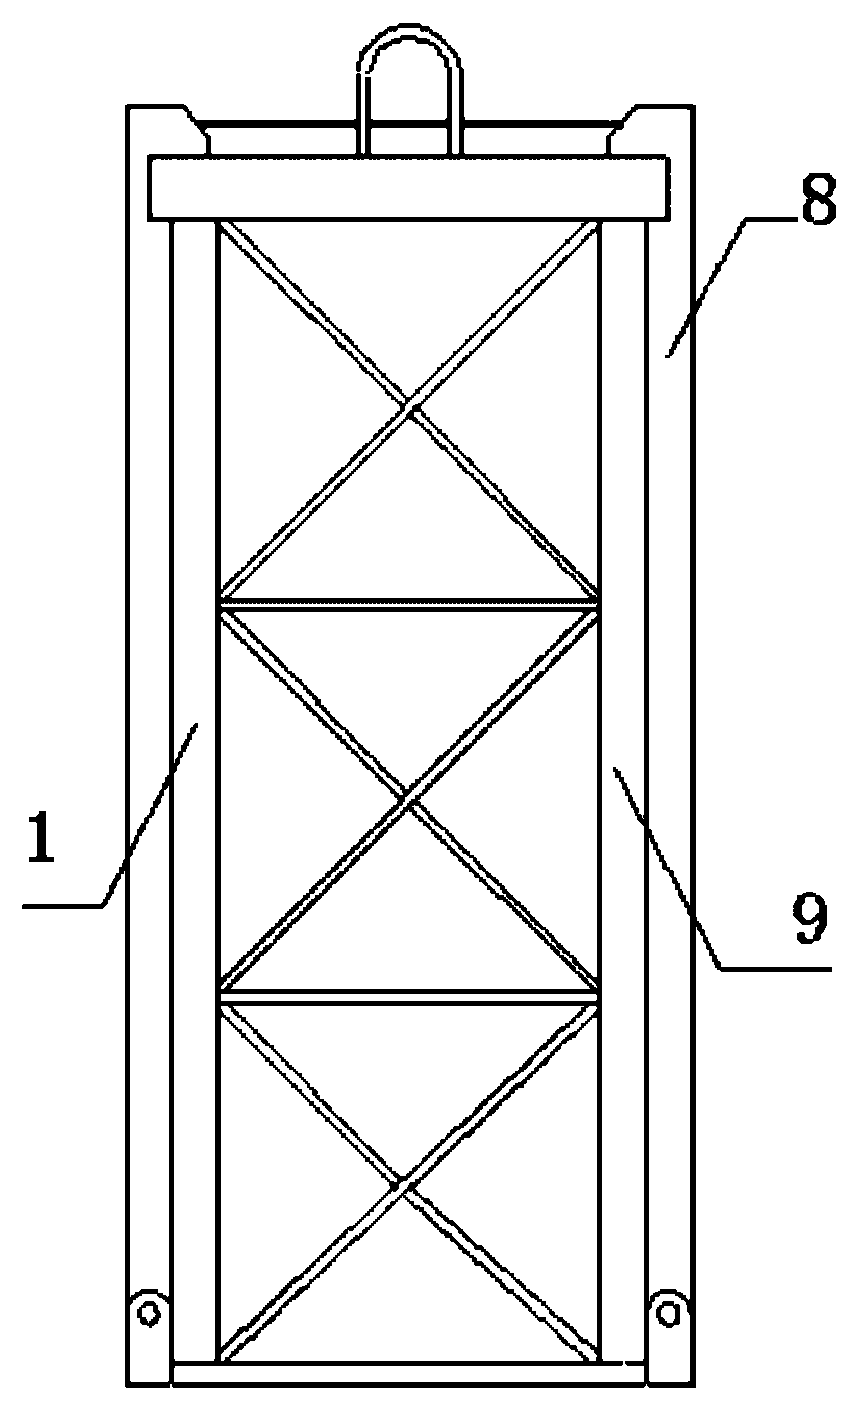 Self-loading device for test of simulating crustal stress of surrounding rock on rock tunnel shaking table